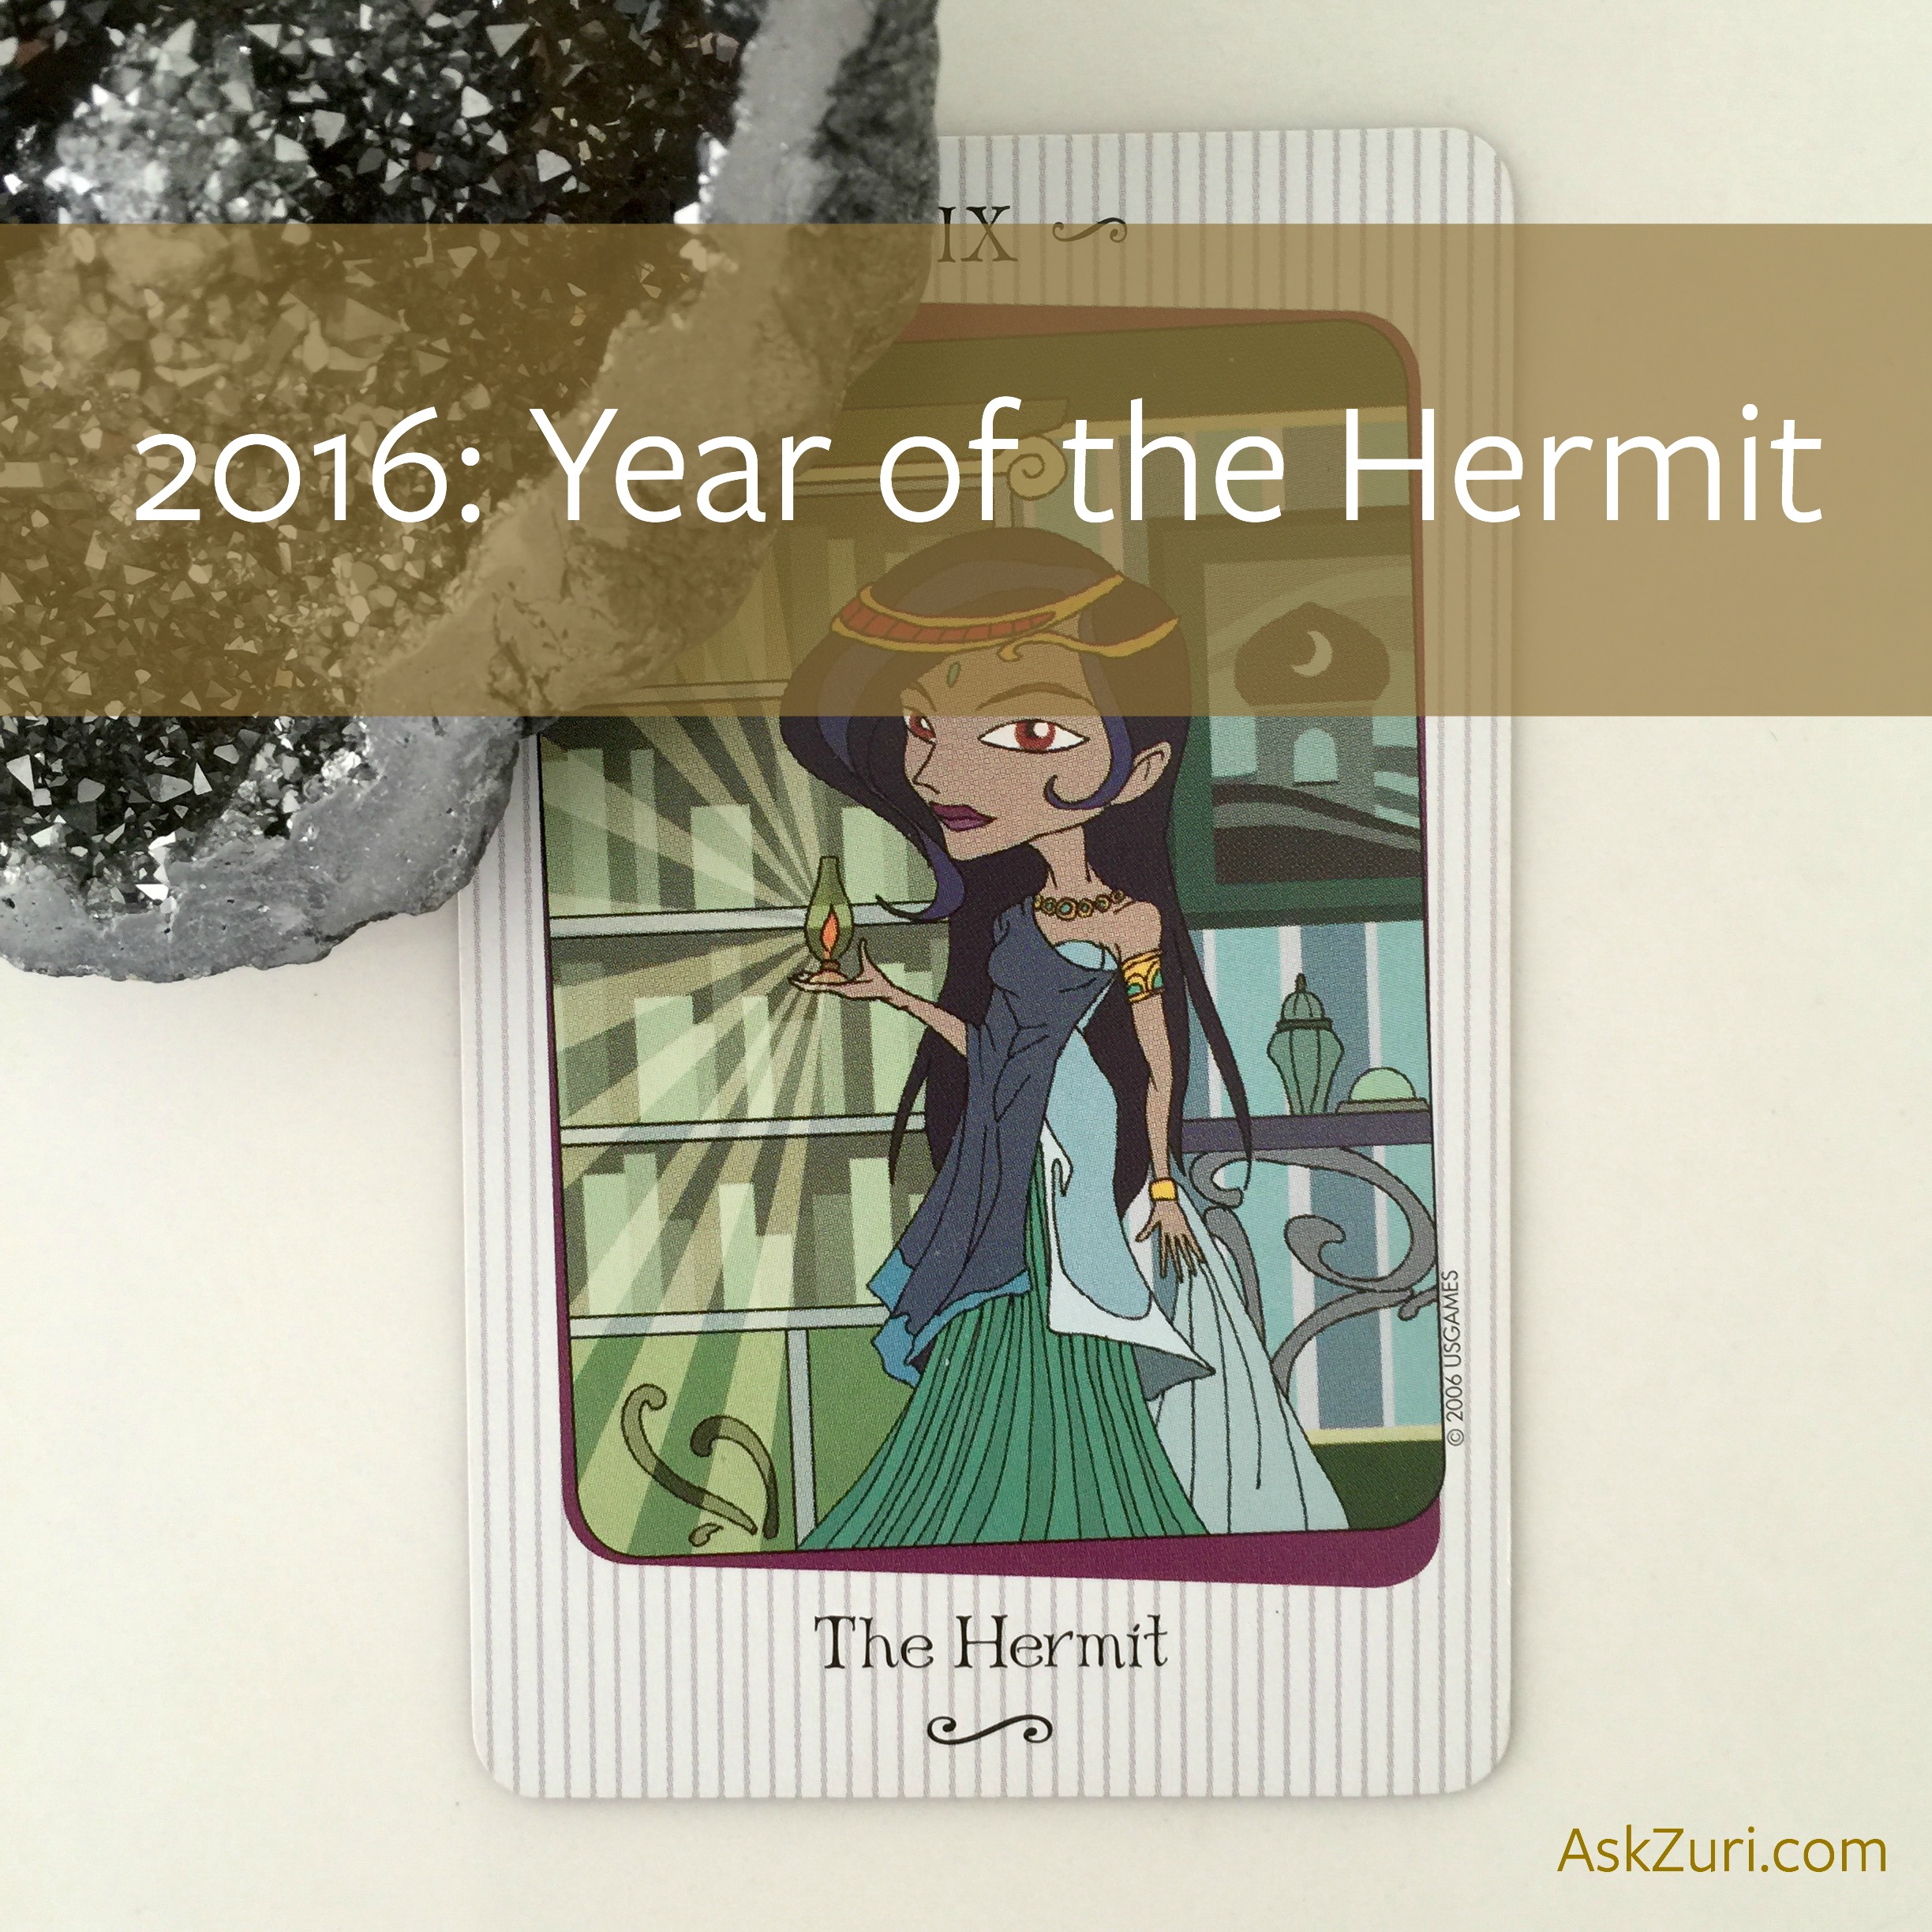 2016 - Year of the Hermit